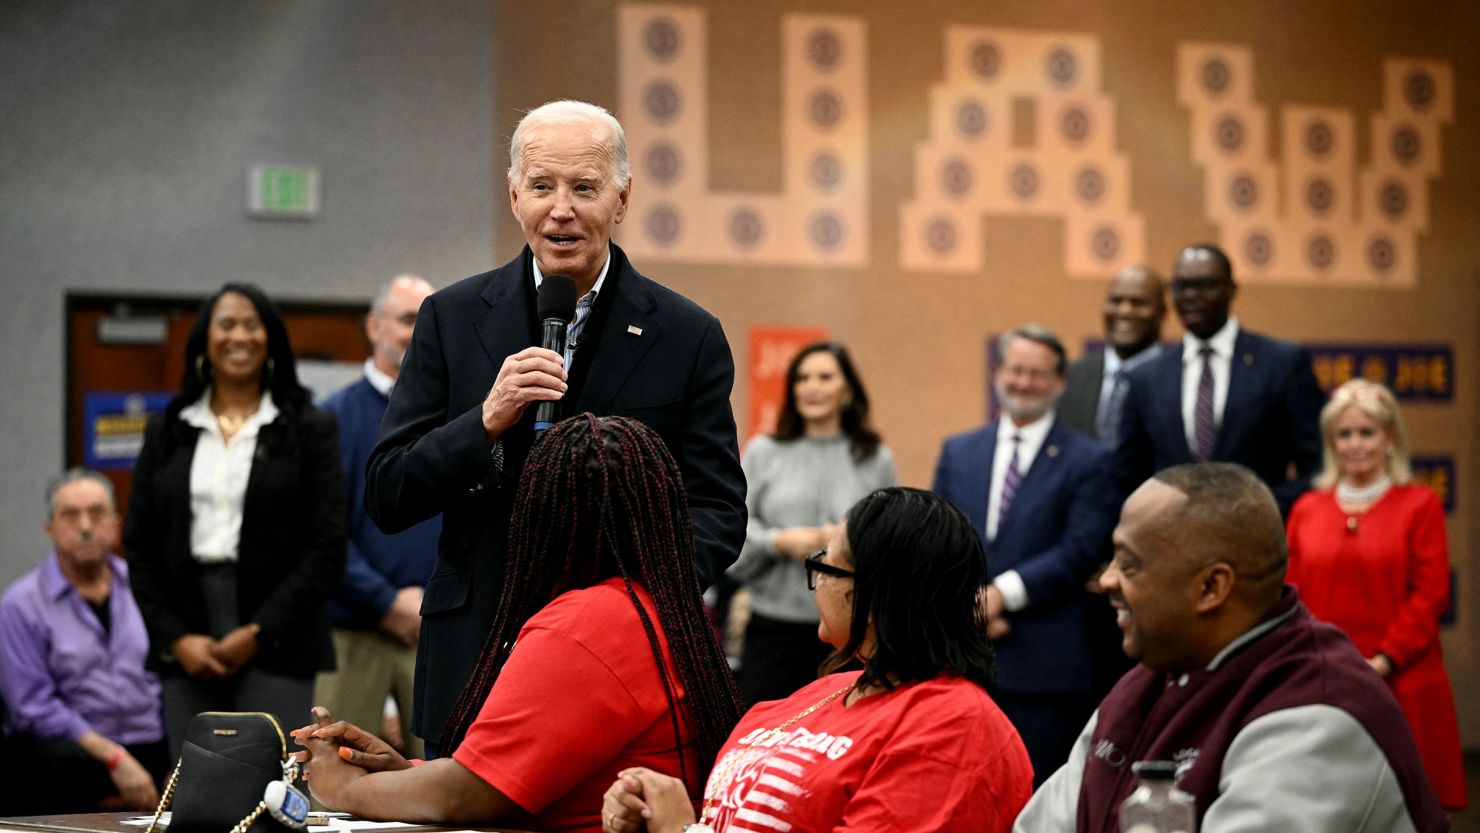 President Joe Biden speaks to members of the United Auto Workers (UAW) at the UAW National Training Center, in Warren, Michigan, on February 1.